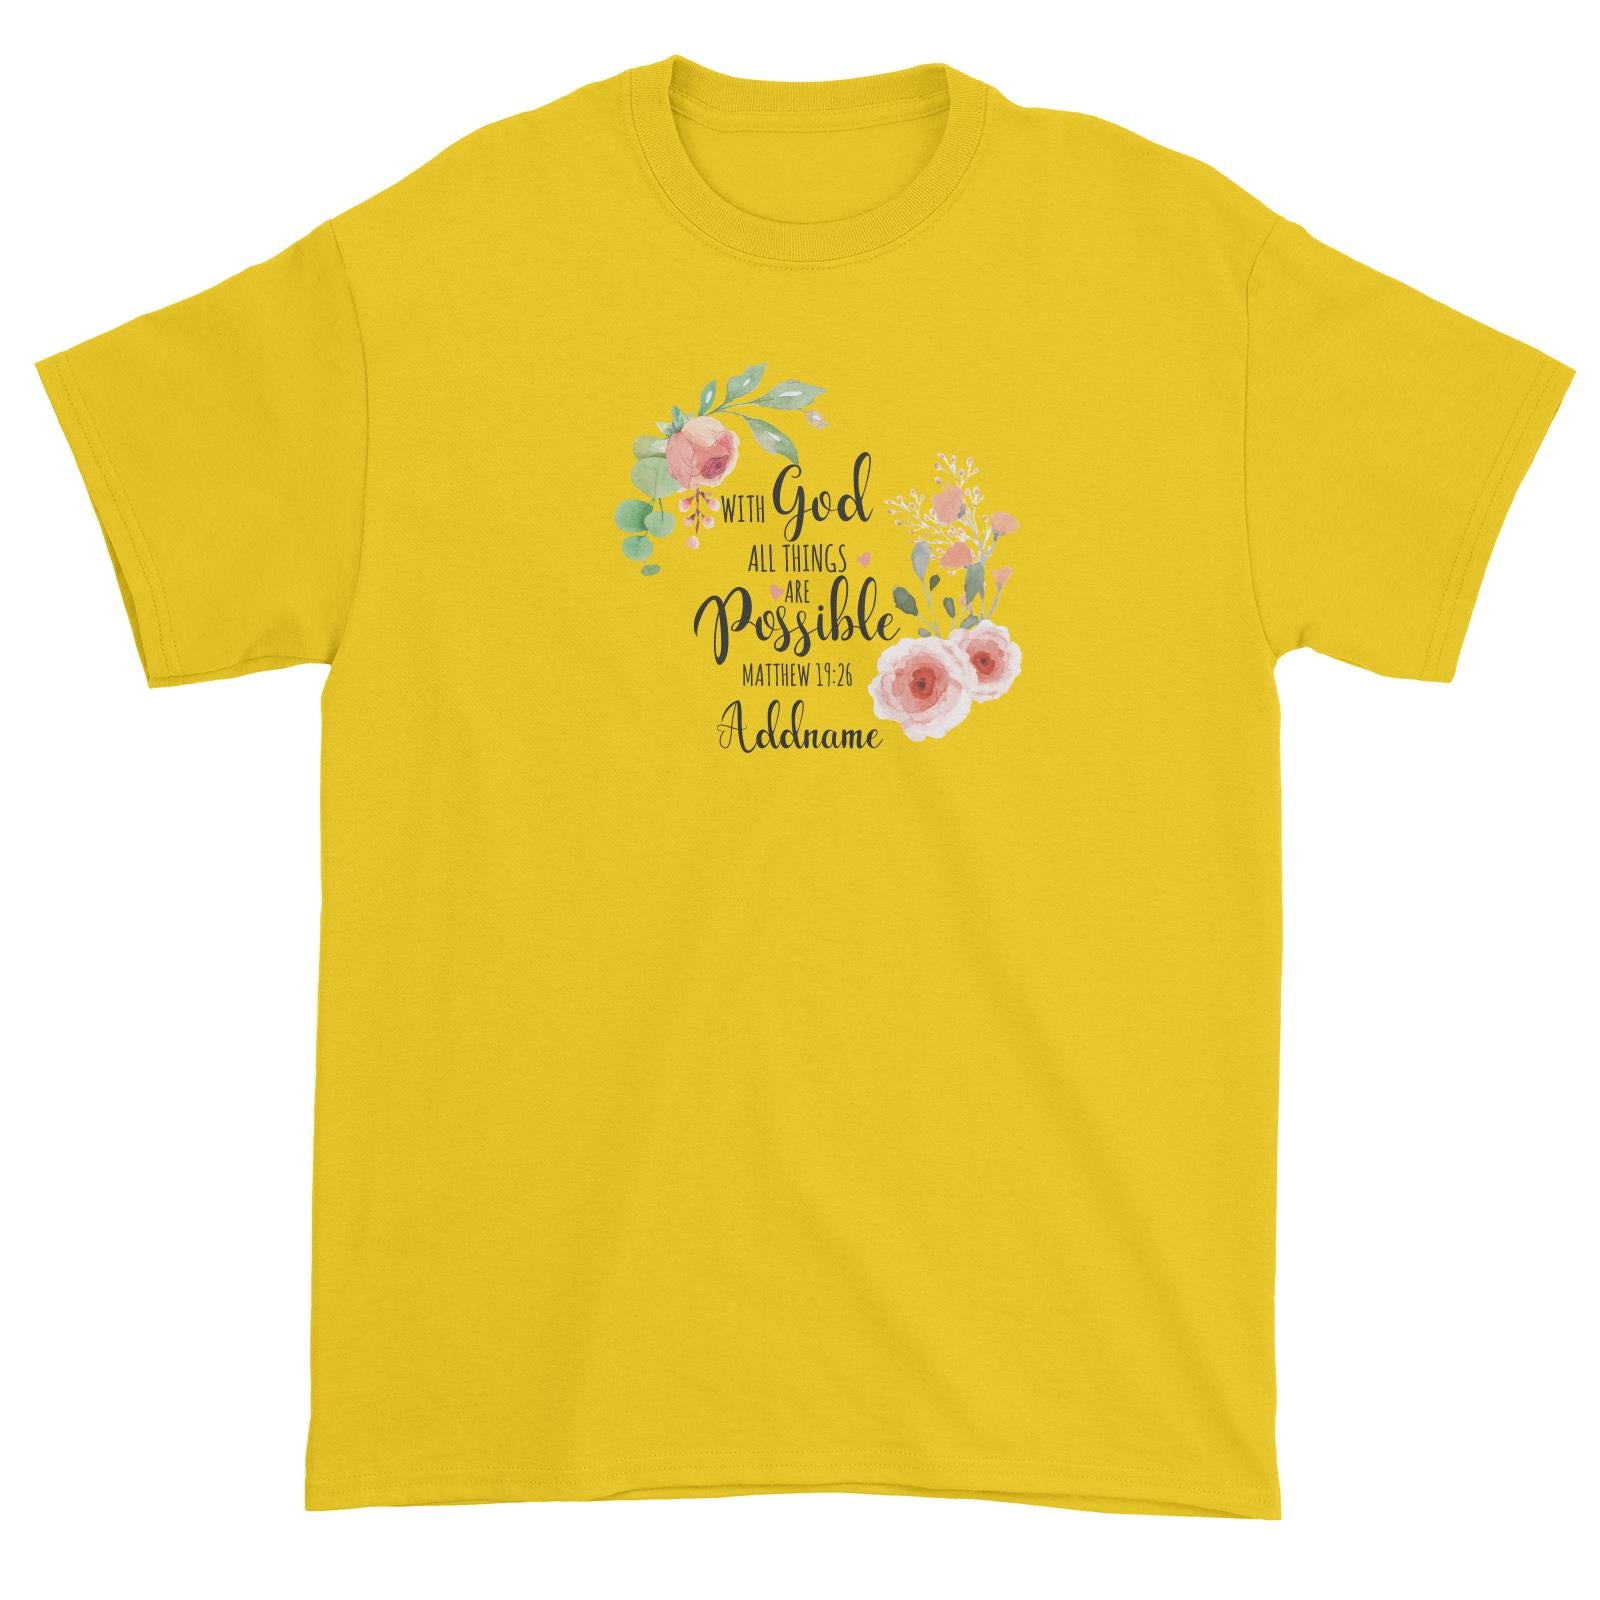 Gods Gift With God All Things Are Possible Matthew 19.26 Addname Unisex T-Shirt